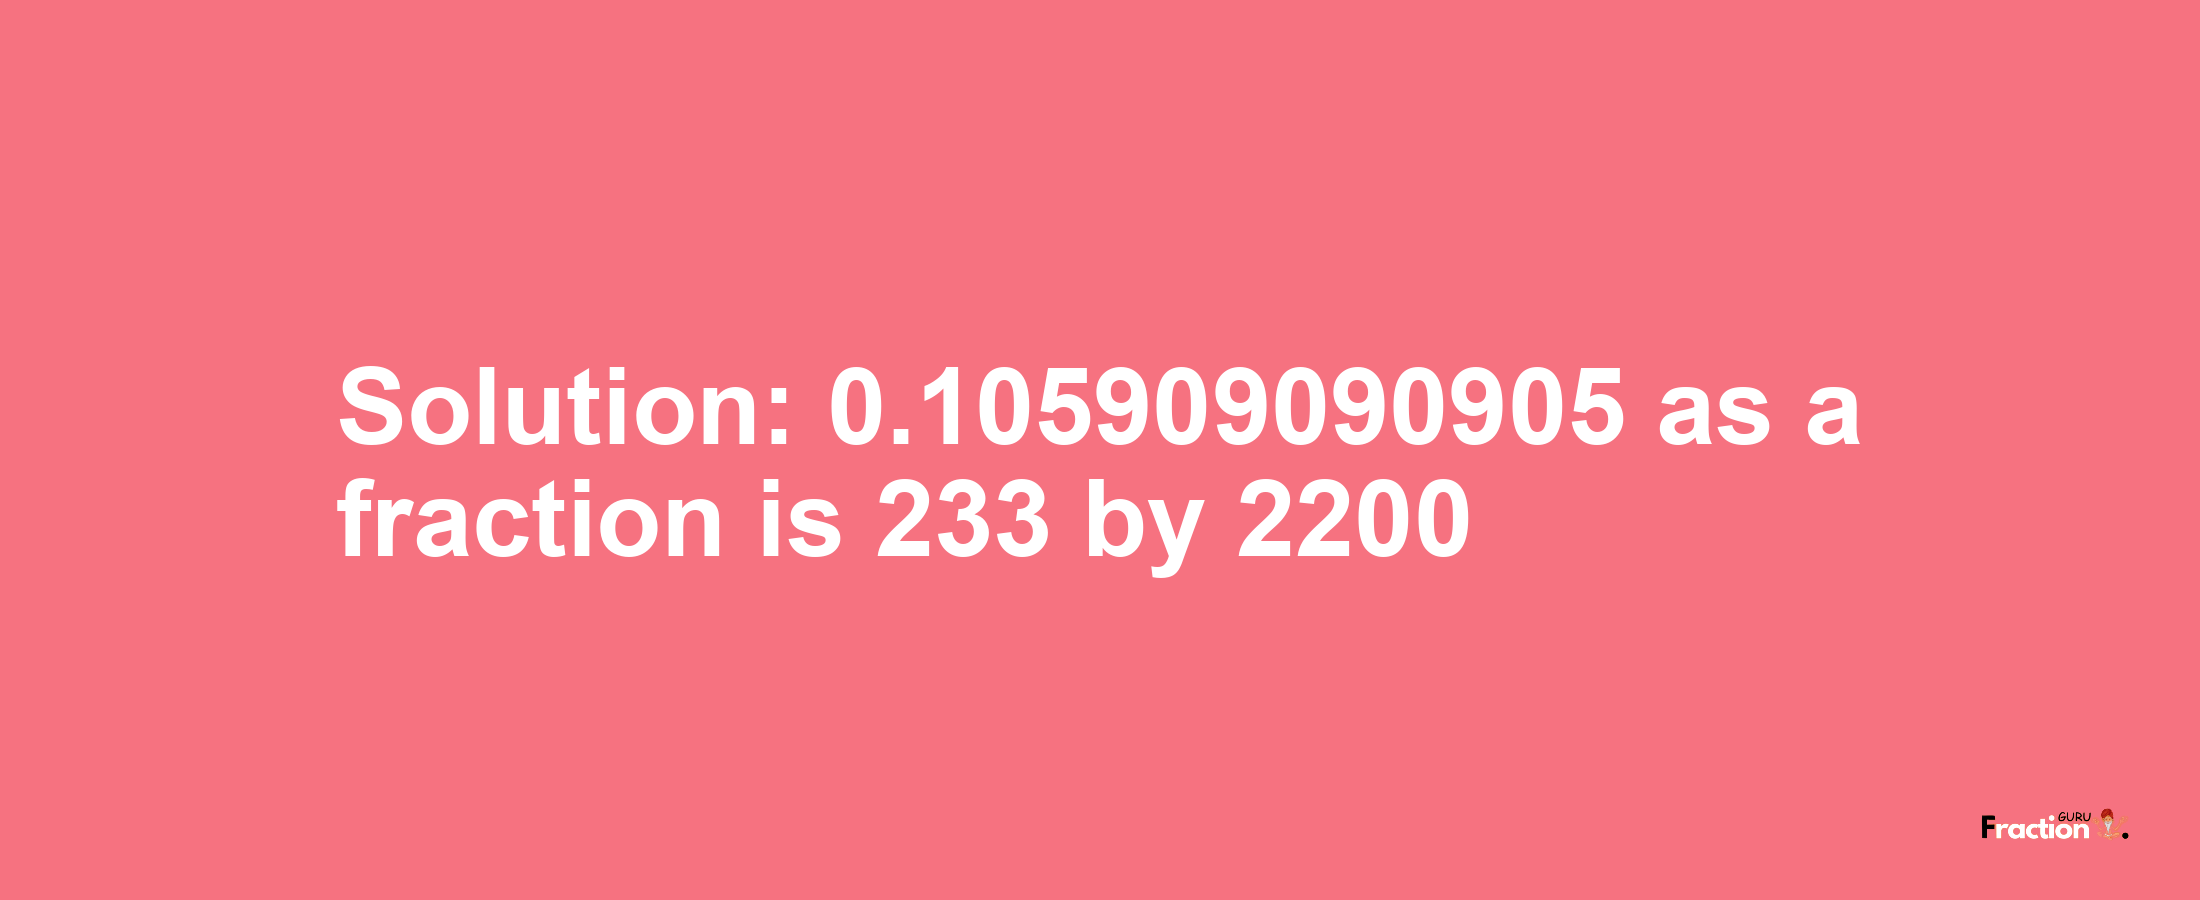 Solution:0.105909090905 as a fraction is 233/2200